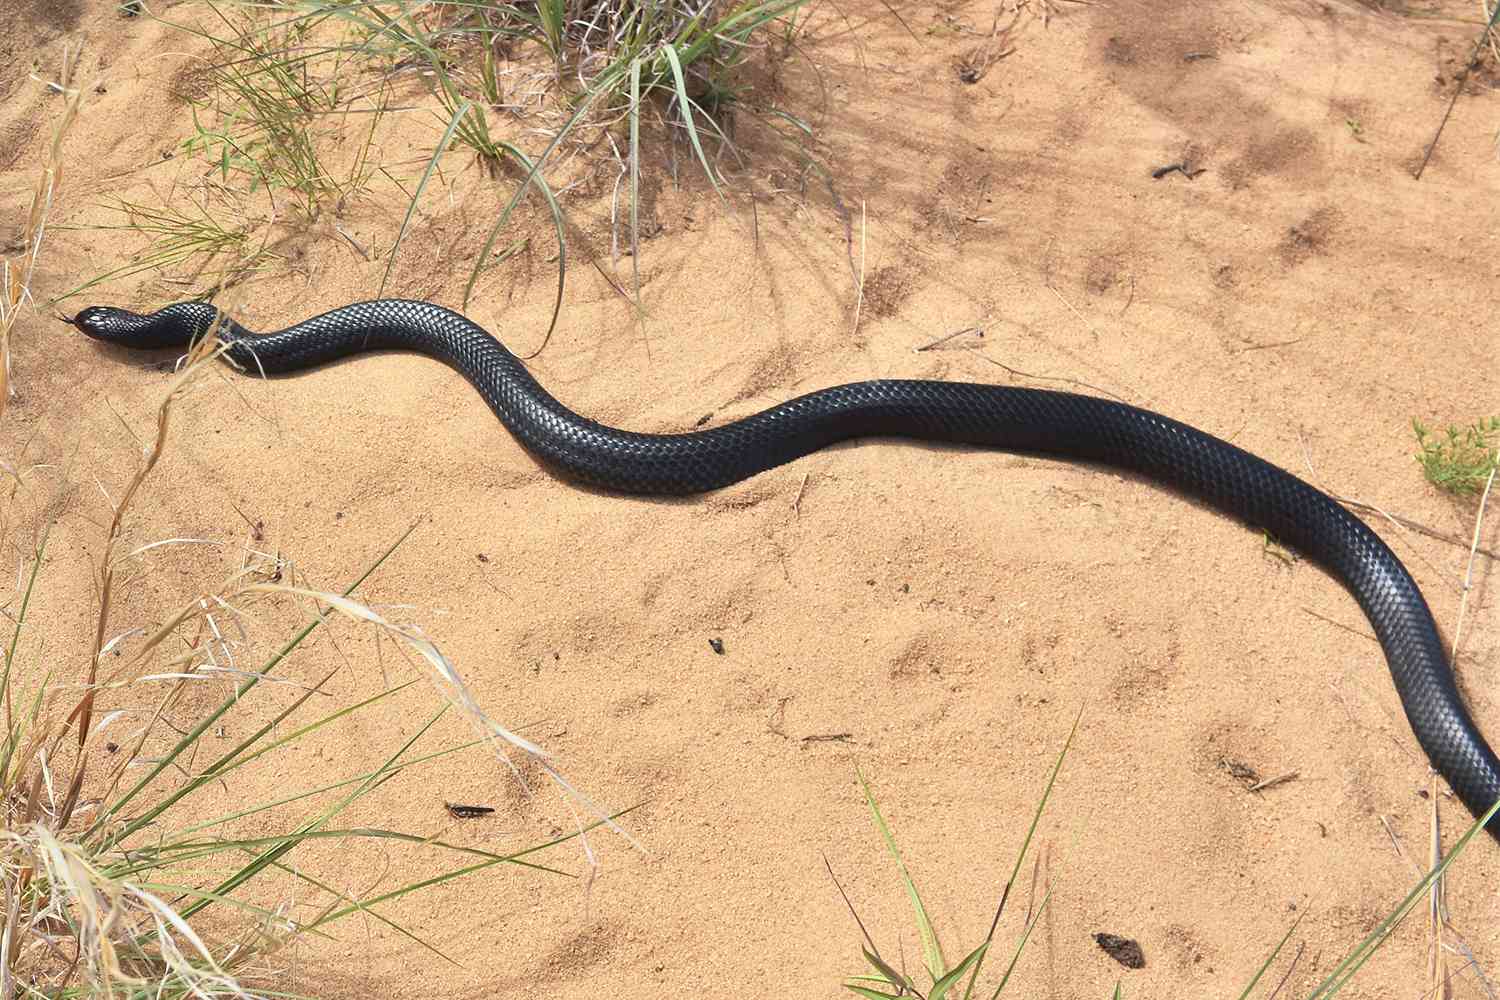 41 Indigo Snakes — the Longest Snake Species Native to the U.S. — Released in Florida